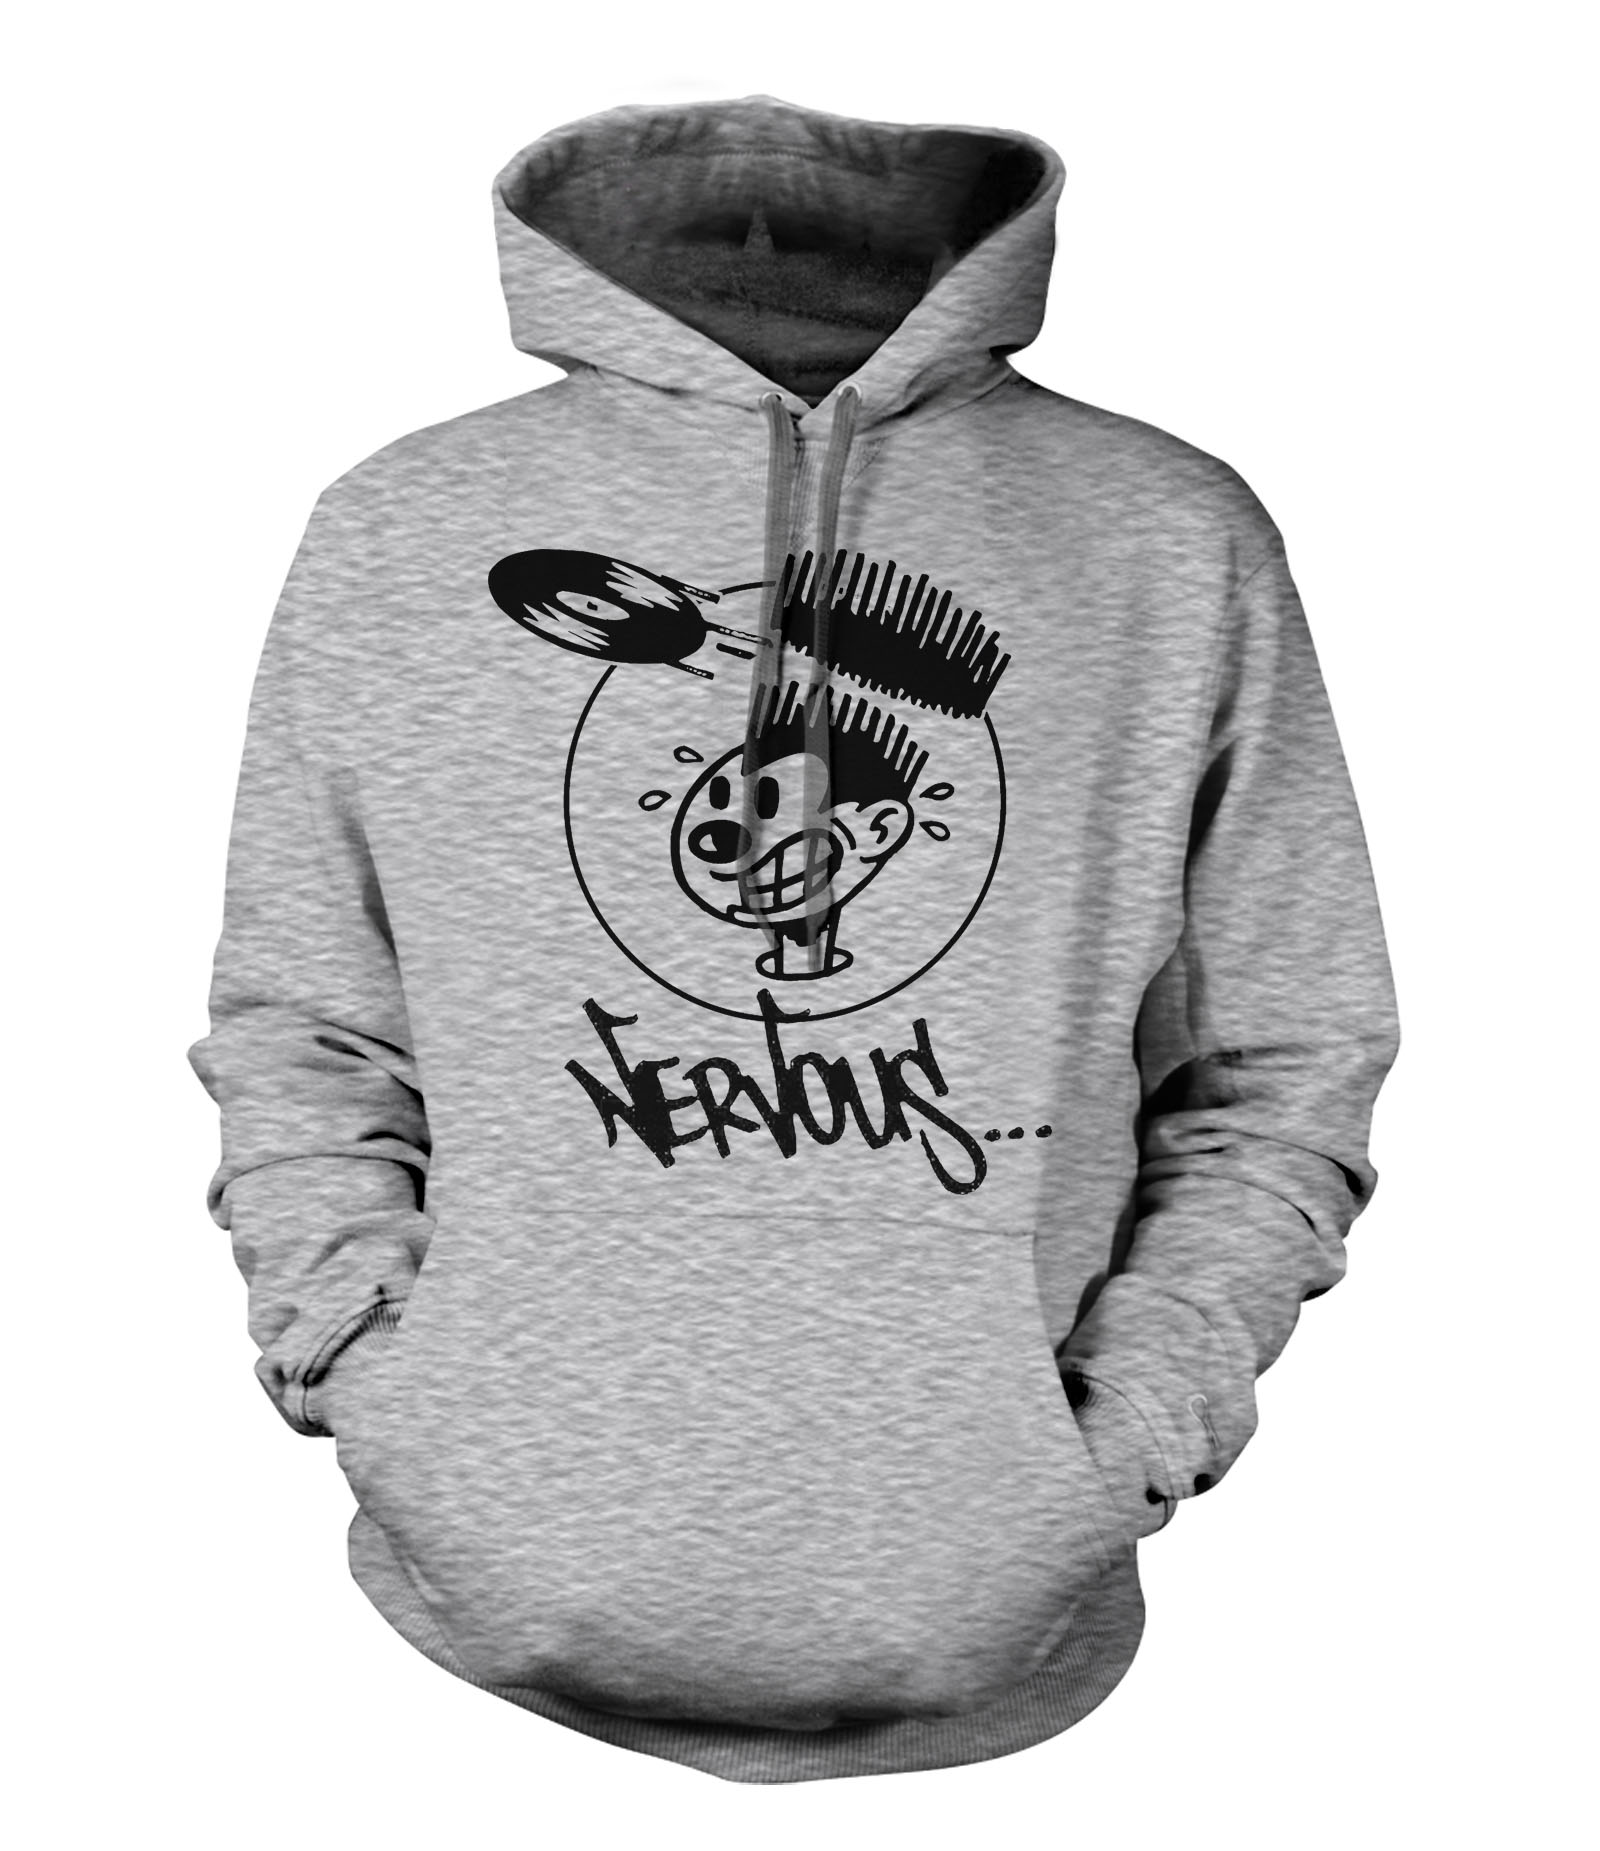 Nervous Records Hoodie - YY7-GD354 Explicit Clothing™